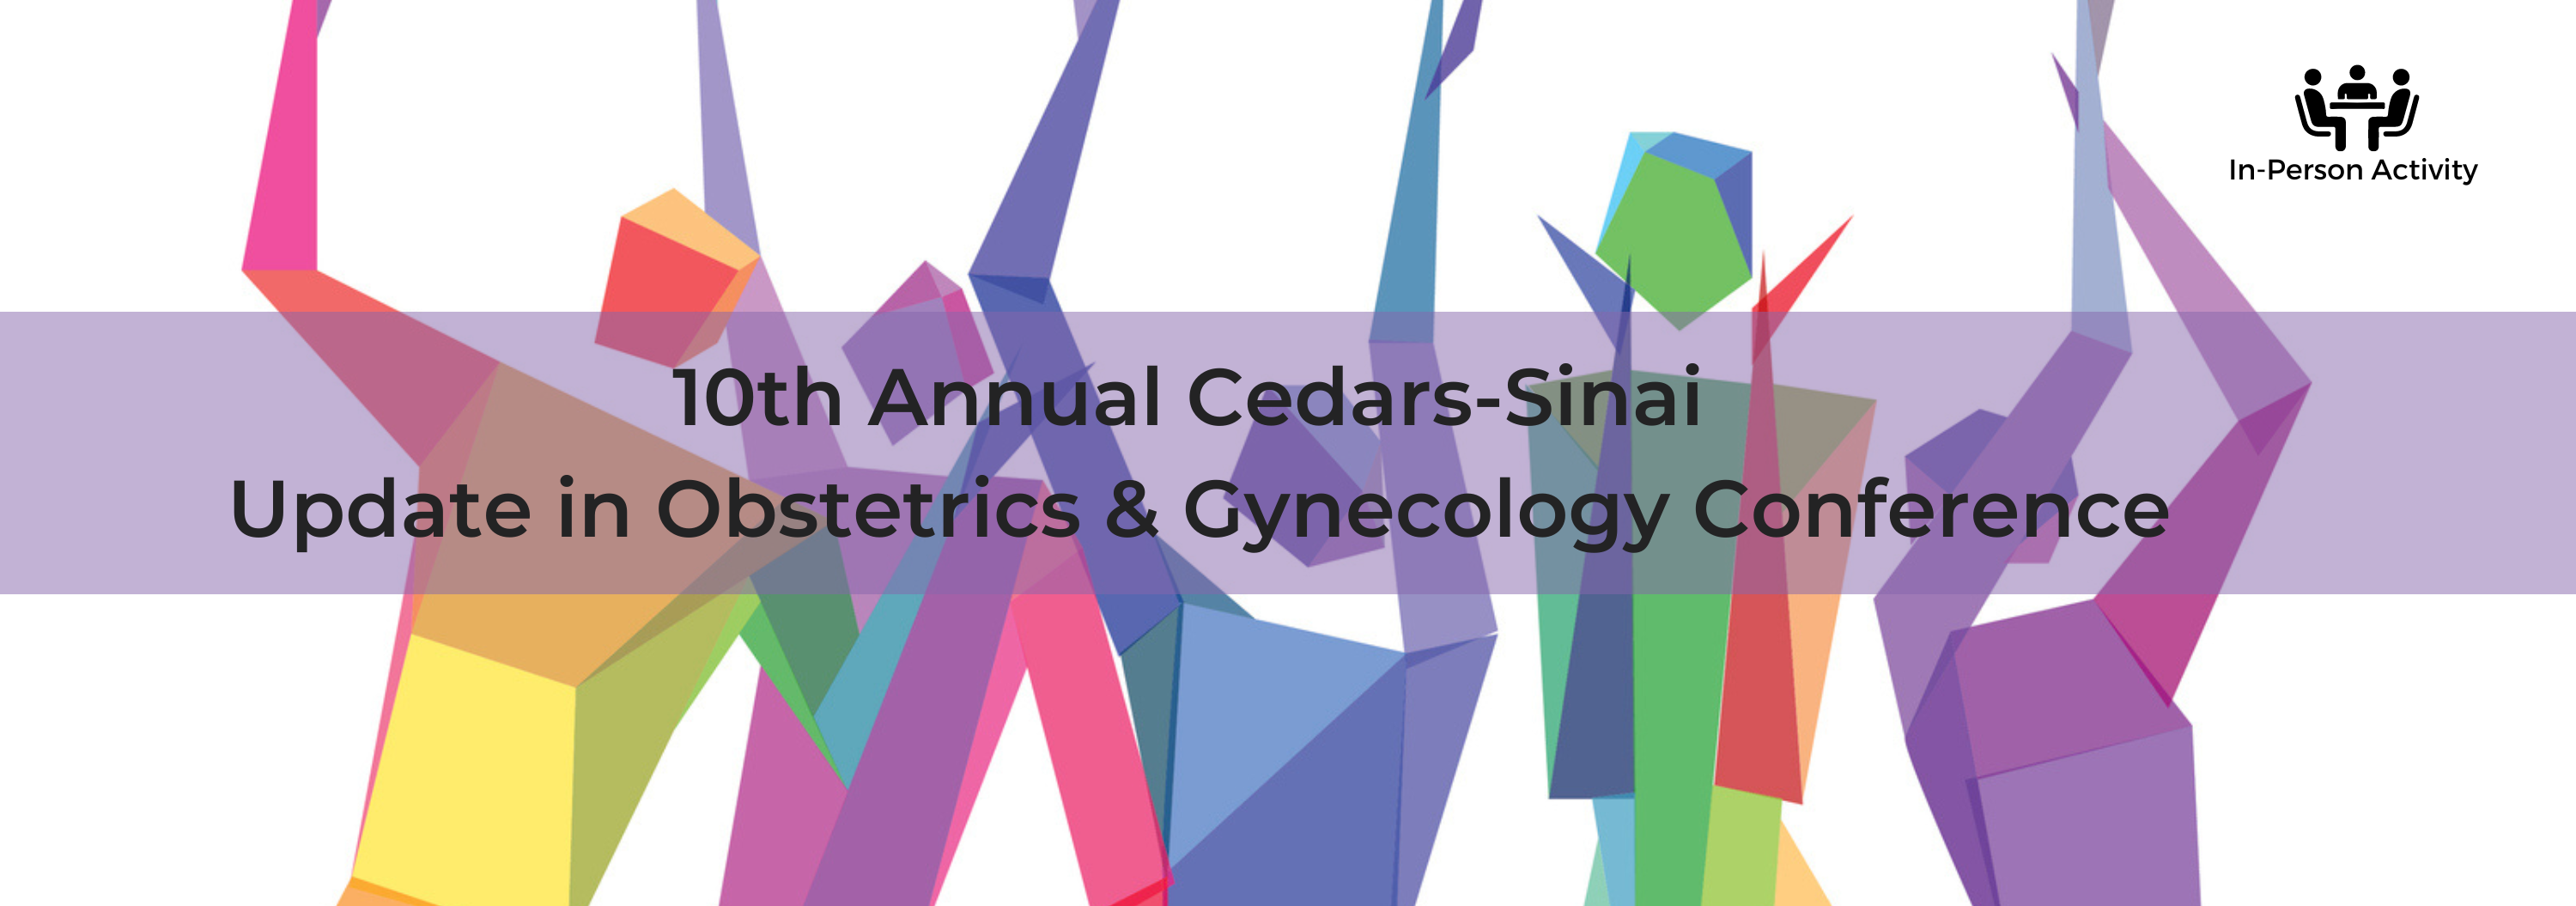 10th Annual Cedars-Sinai Update in Obstetrics & Gynecology Conference Banner